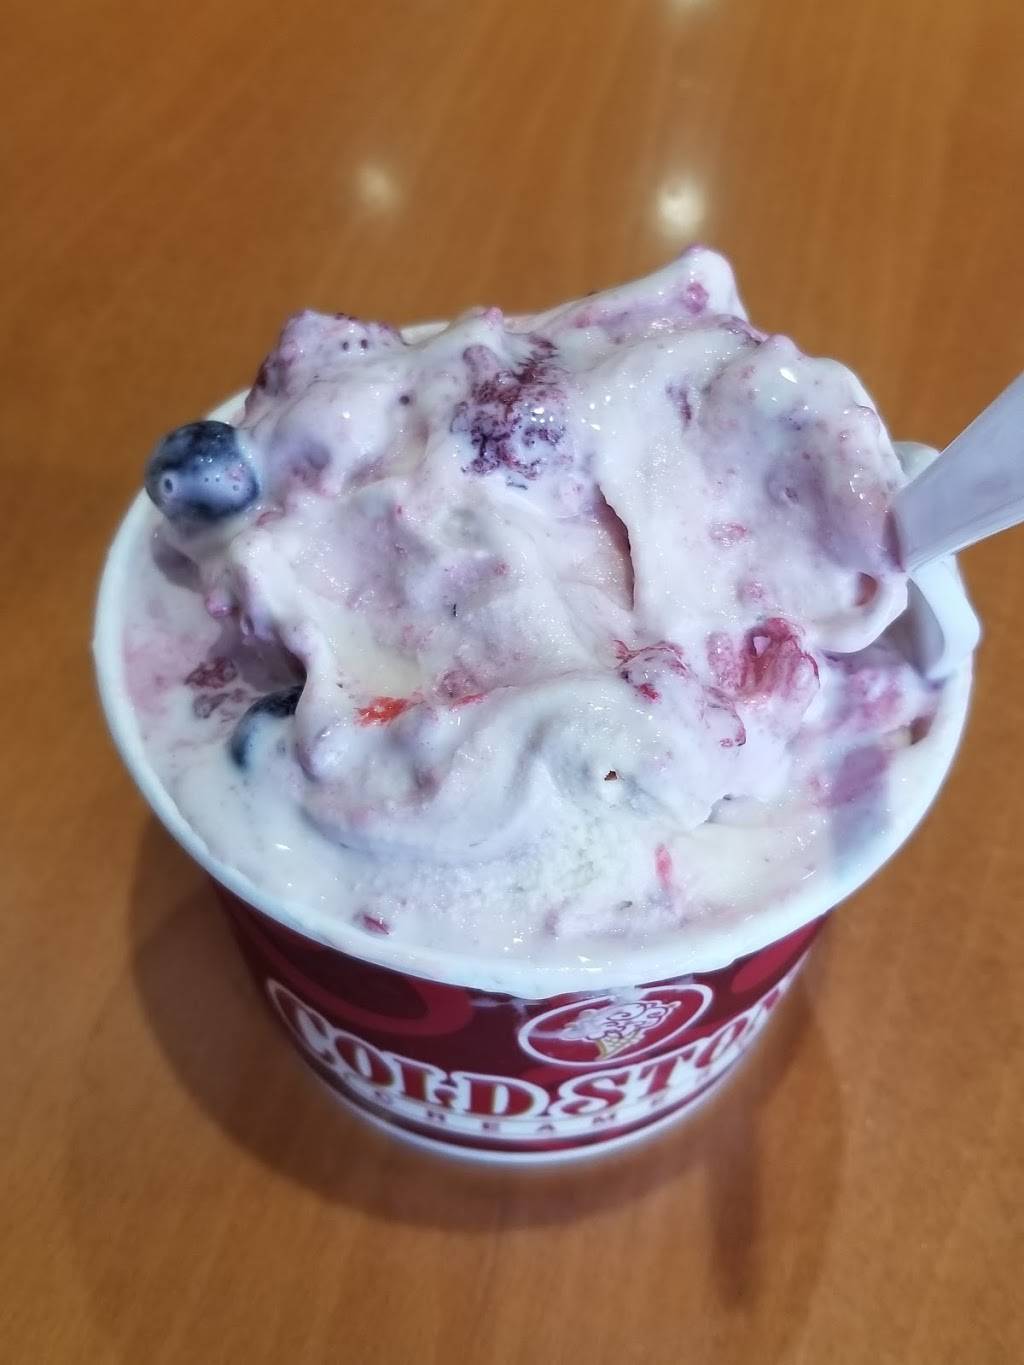 Cold Stone Creamery | bakery | 7080 Mannheim Rd, Rosemont, IL 60018, USA | 8478246670 OR +1 847-824-6670